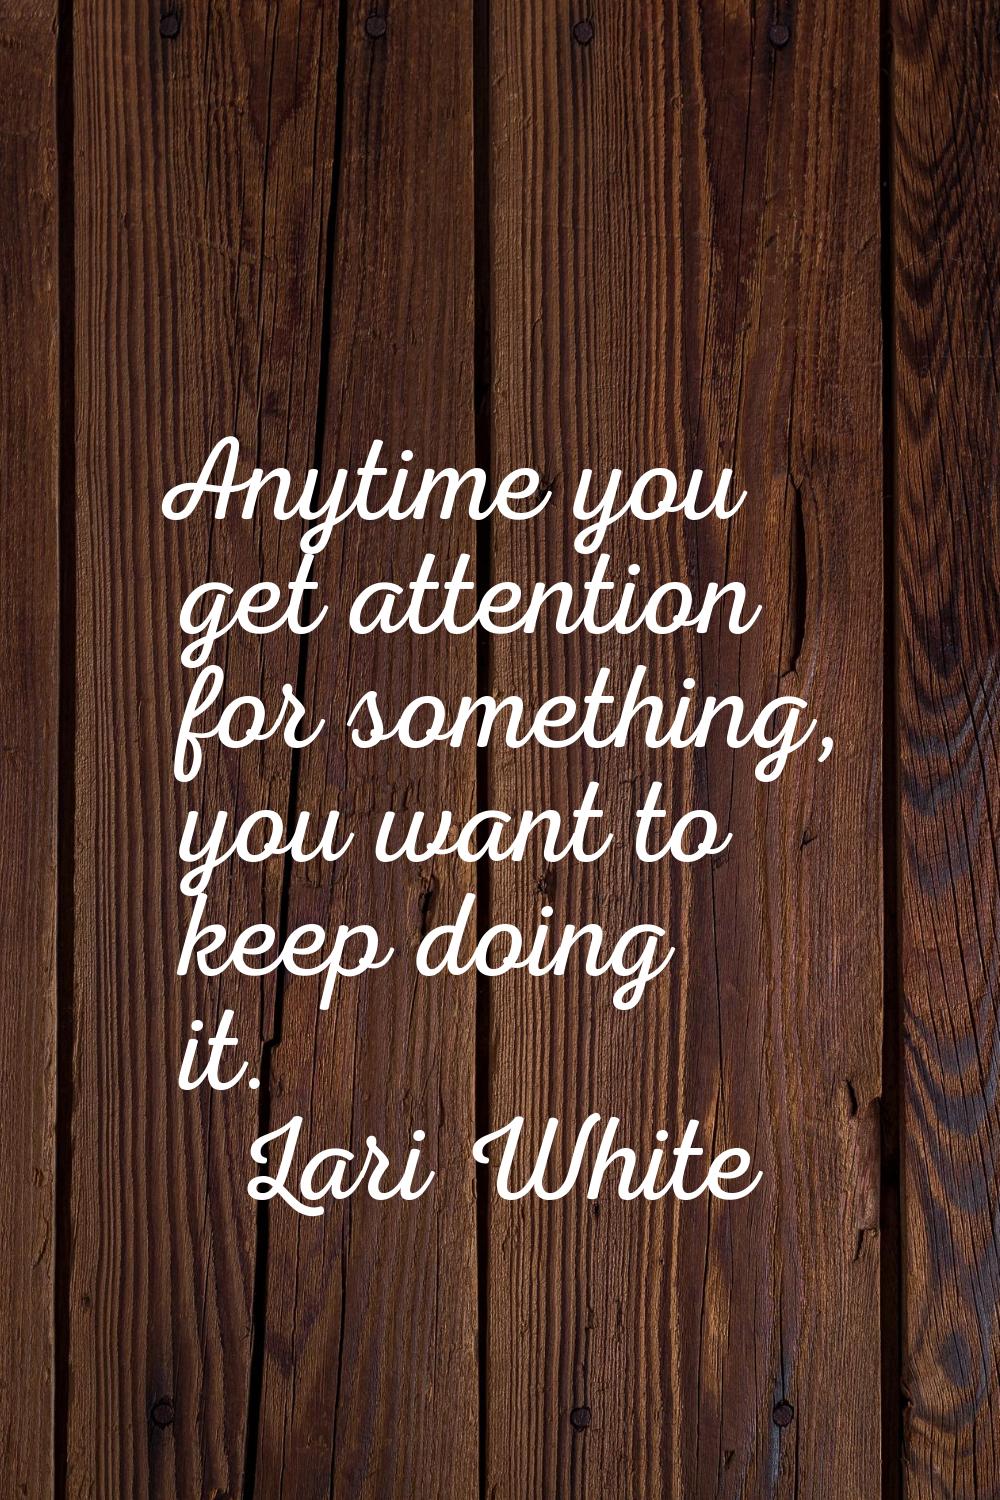 Anytime you get attention for something, you want to keep doing it.